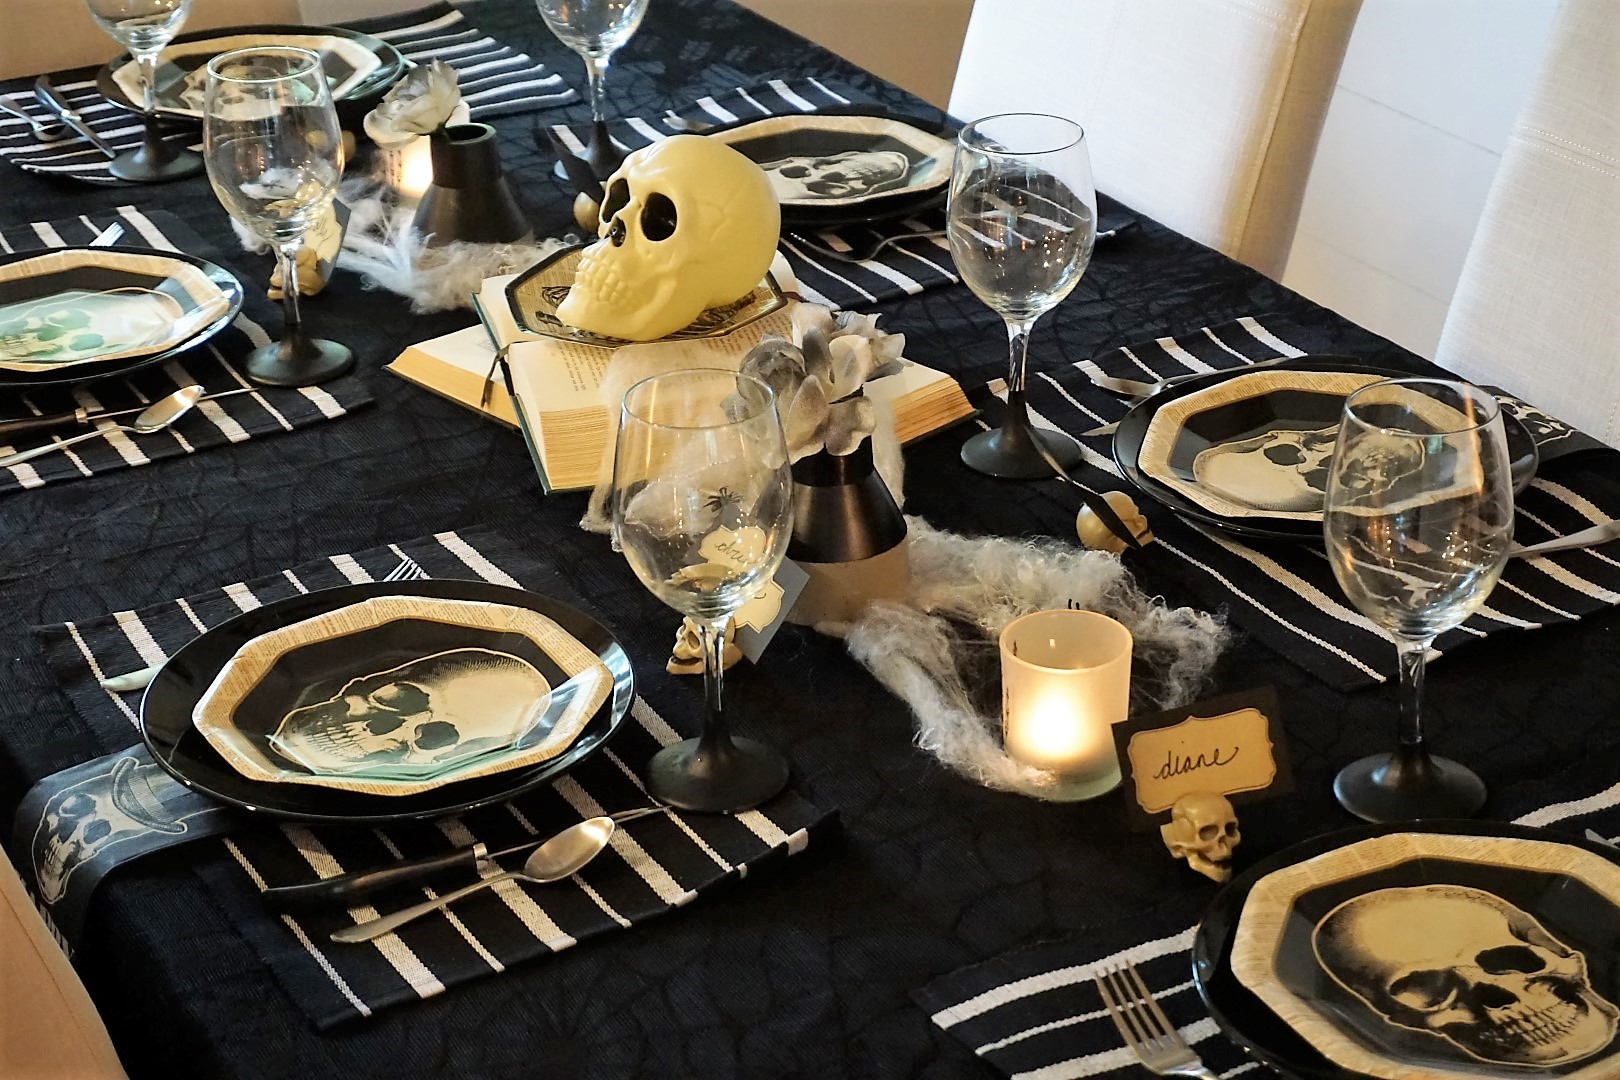  Spooky chic doesn’t have to be expensive. Click here to see how to re-create this Halloween table! | Legally Crafty #halloweentable #halloweendiy #diyplacecards #halloweendecor #halloweendinnerparty 